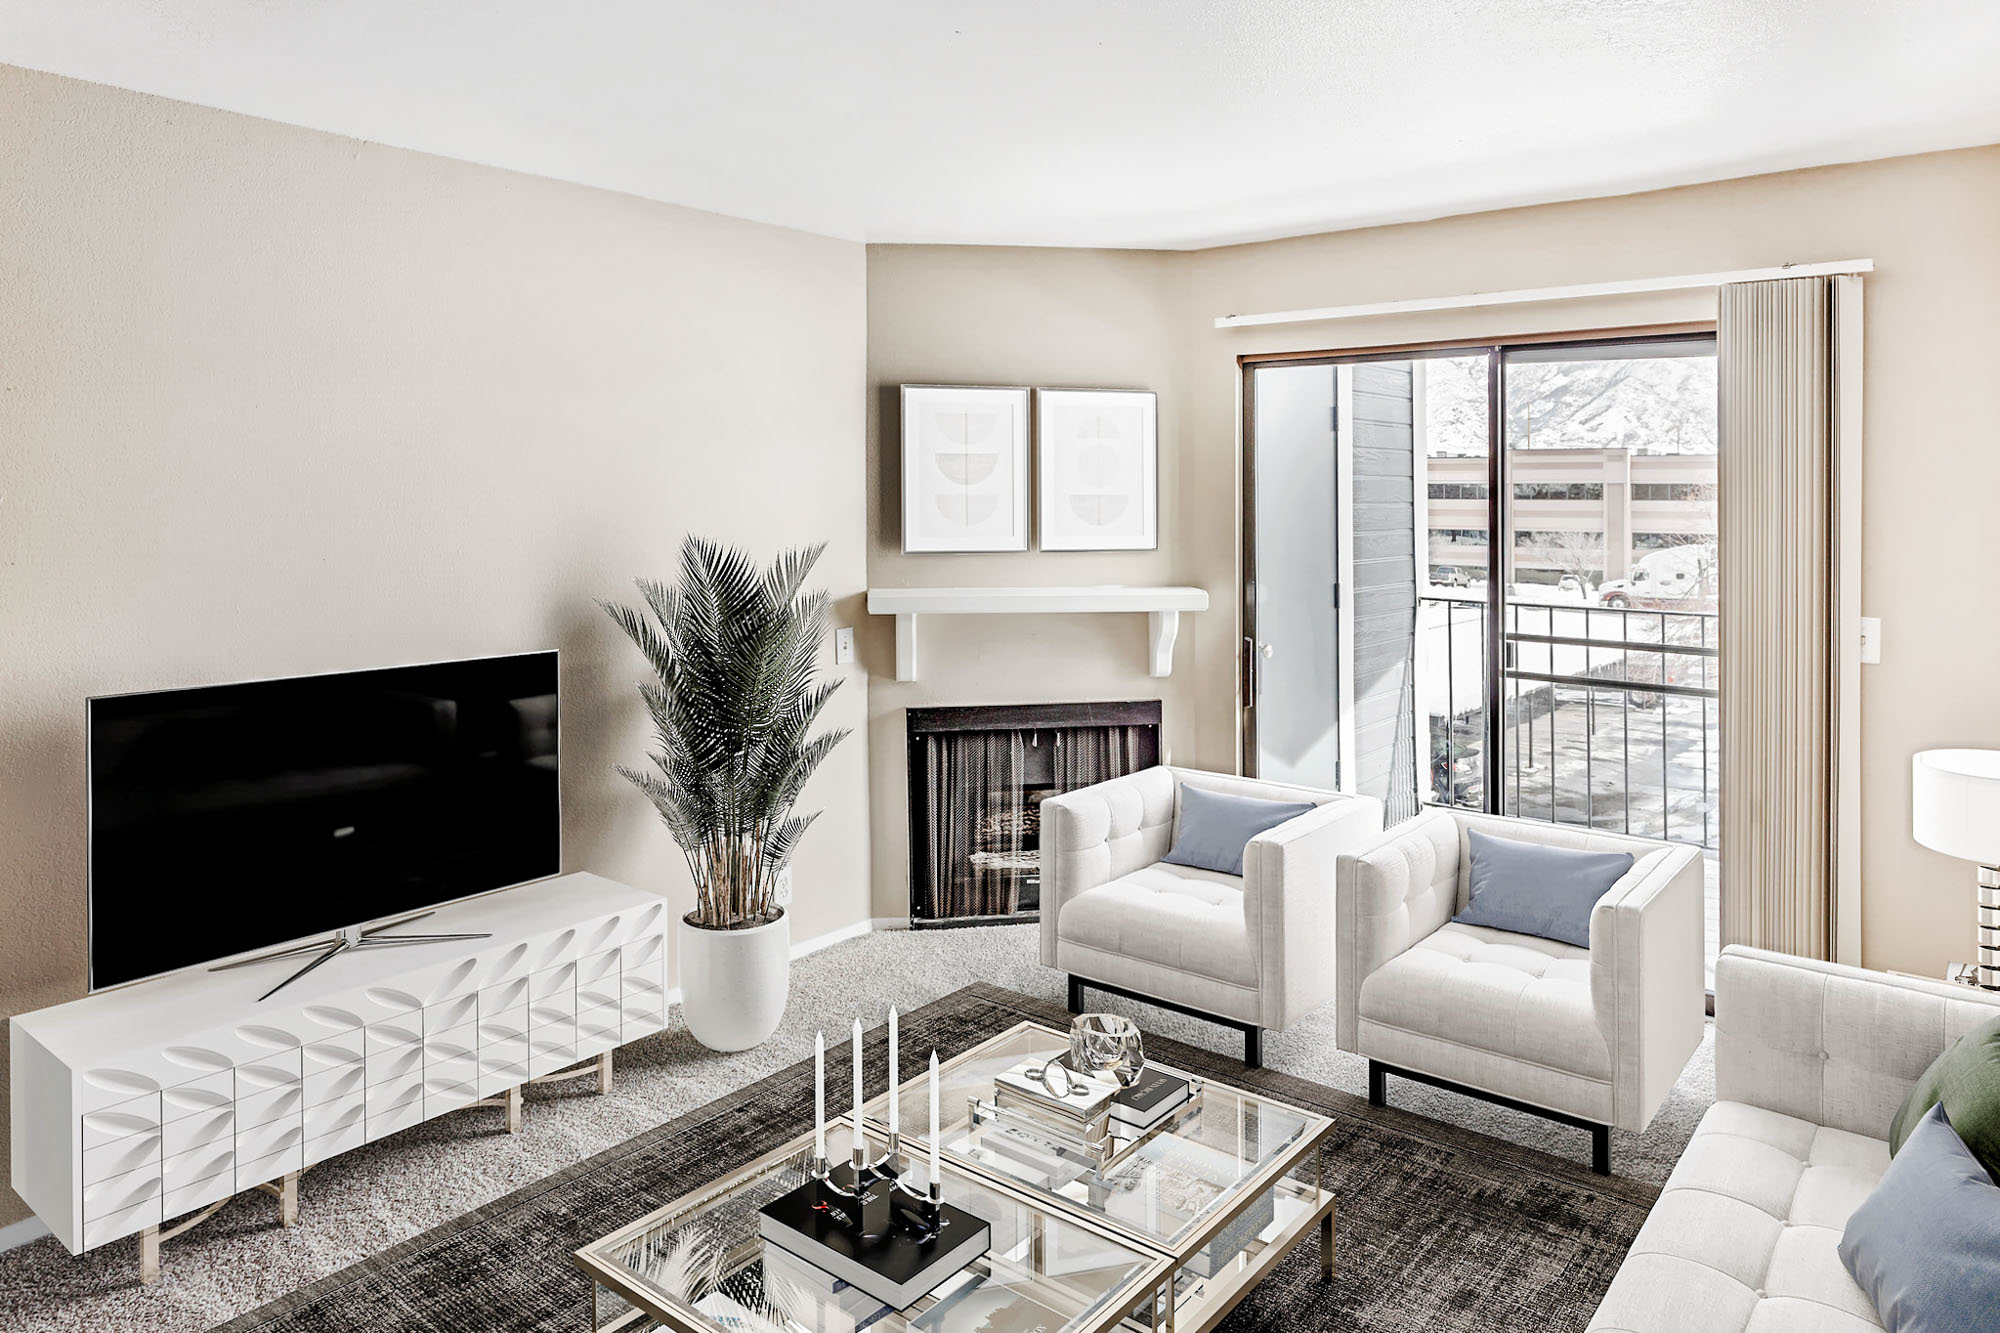 A living area in an apartment at James Pointe near Salt Lake City, Utah.